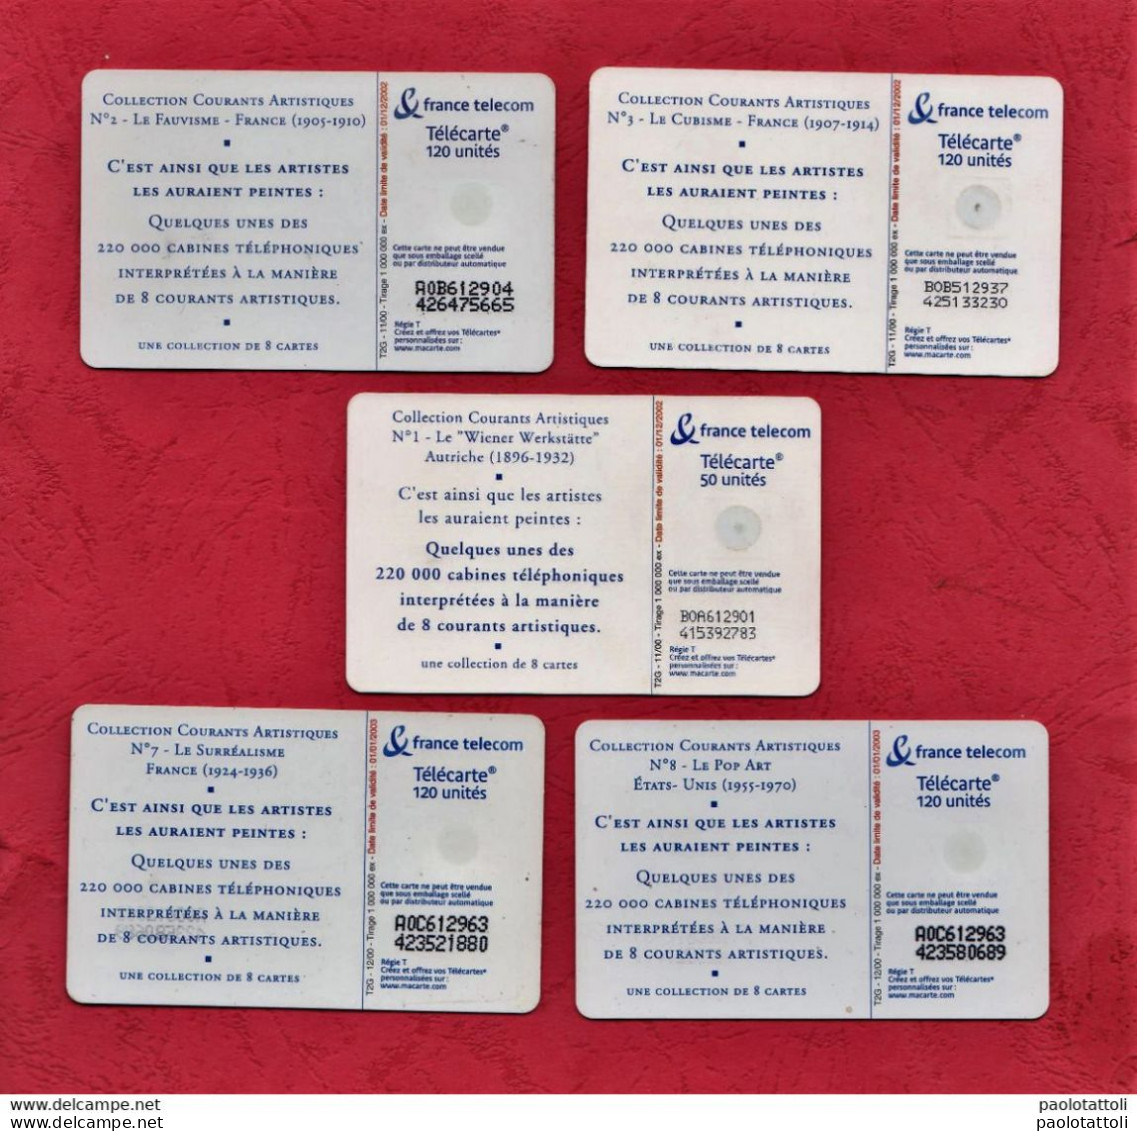 France- France Telecom- Collection Courants Artistiques. Cats N° 1, 2, 3, 7 & 8- Phone Cards With Chips Used By 50 & 120 - 2000